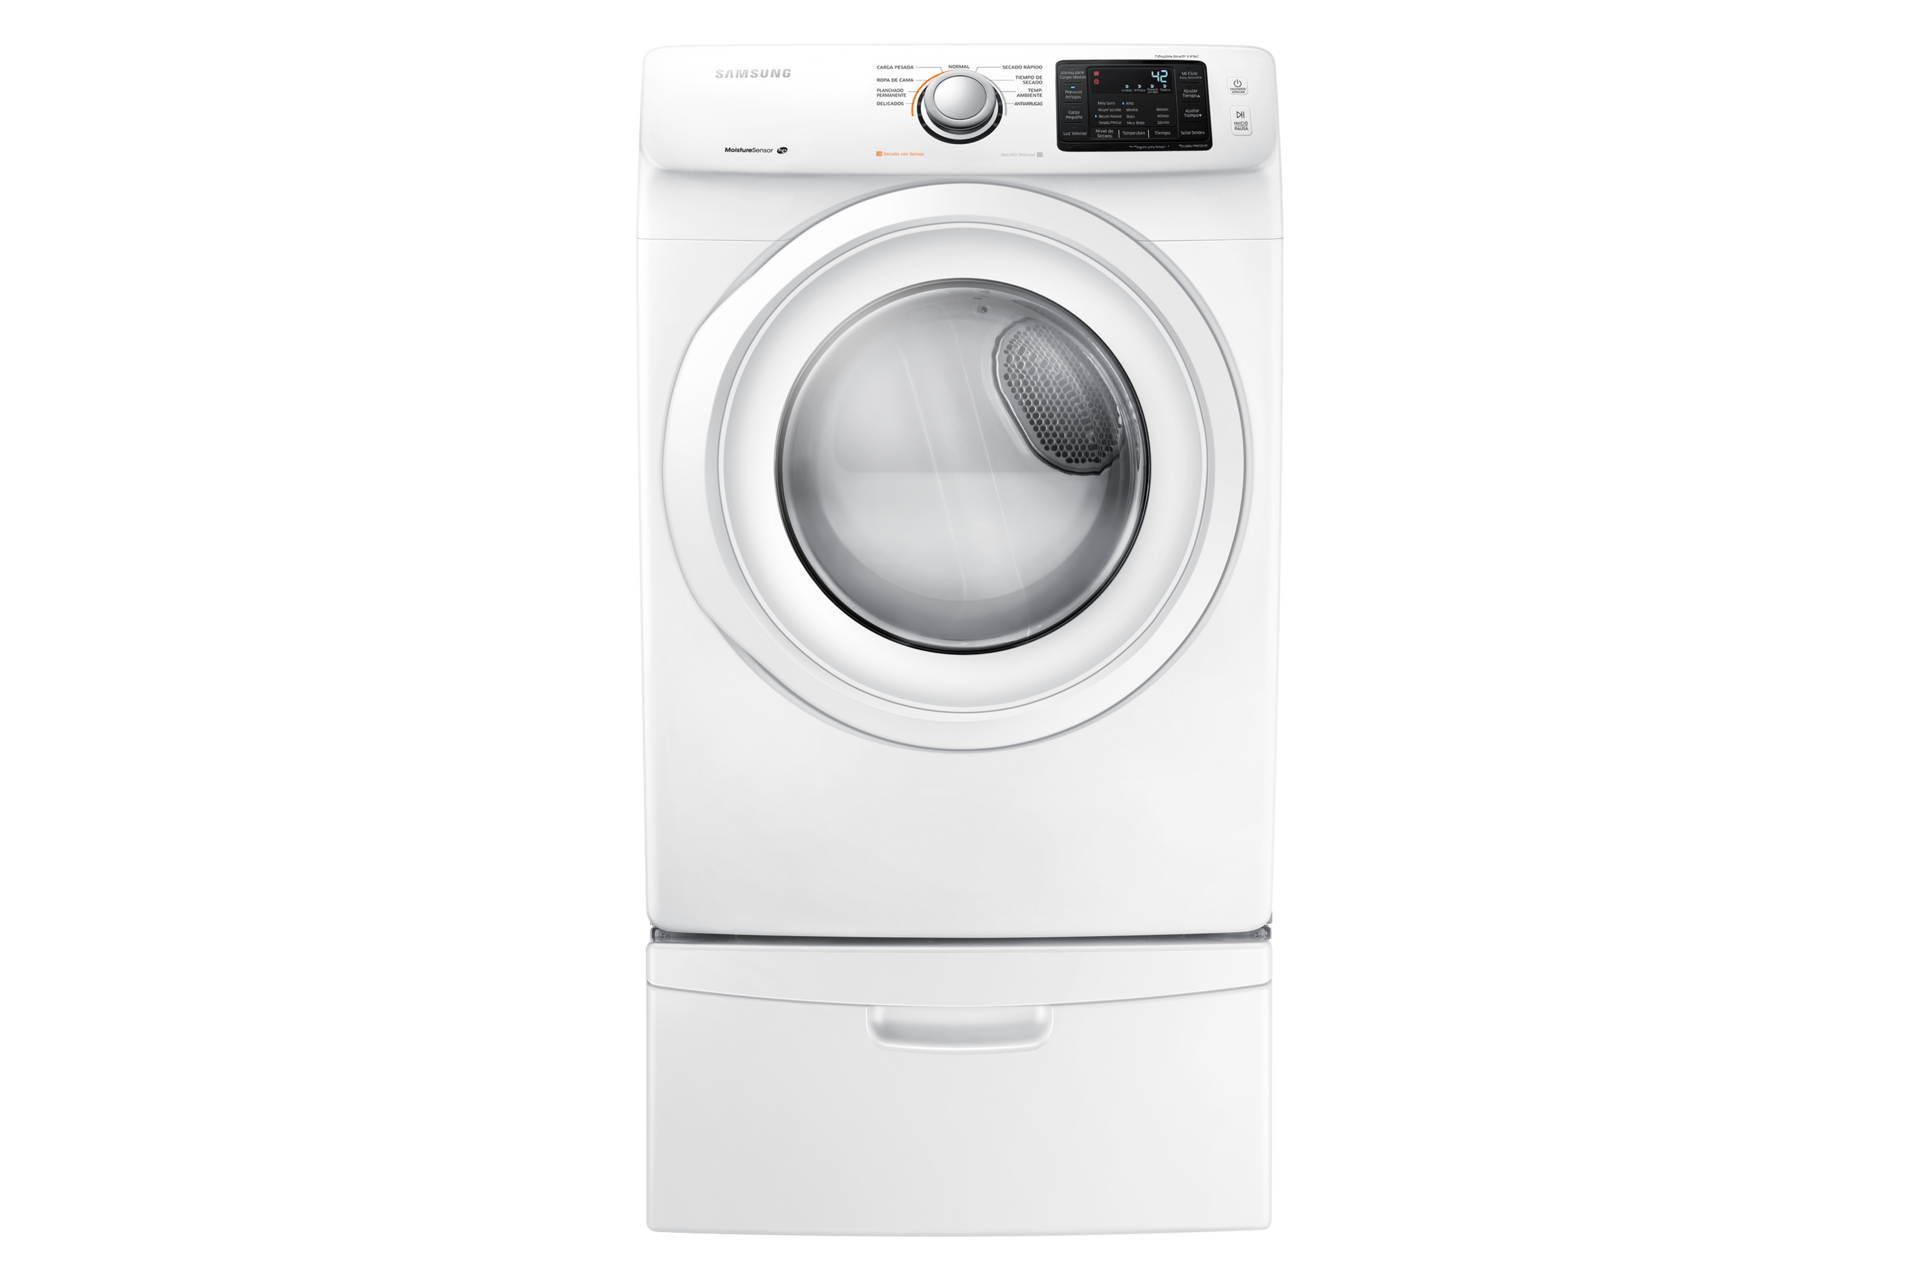 DV5000H Dryer with Eco Dry, | Samsung Support